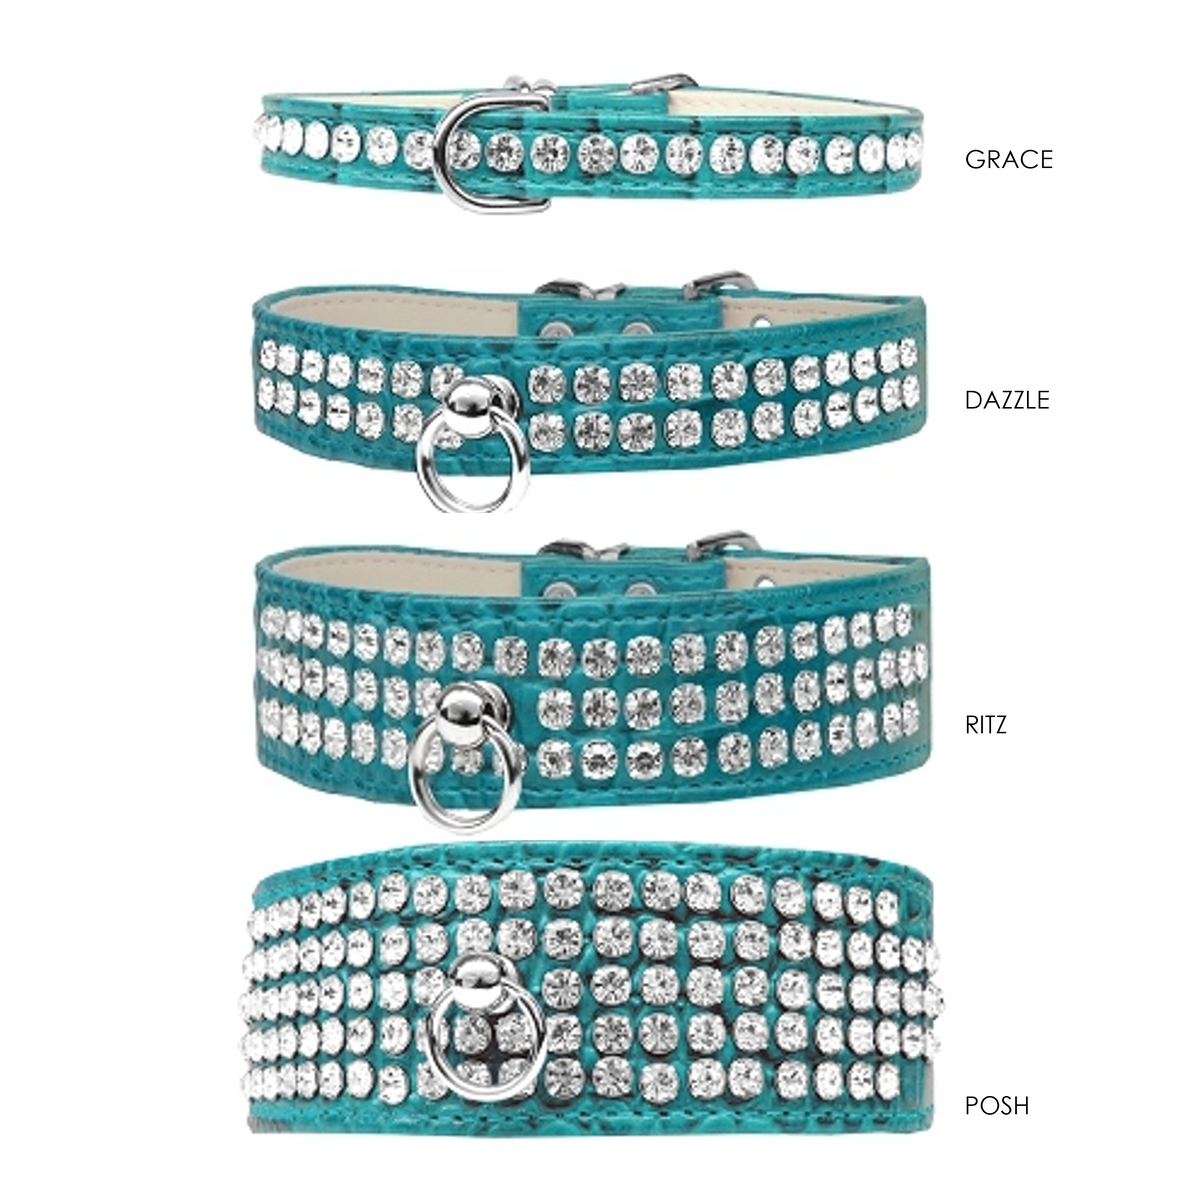 Grace 1-row Crystal Faux Croc Dog Collar - Turquoise - 3 Red Rovers